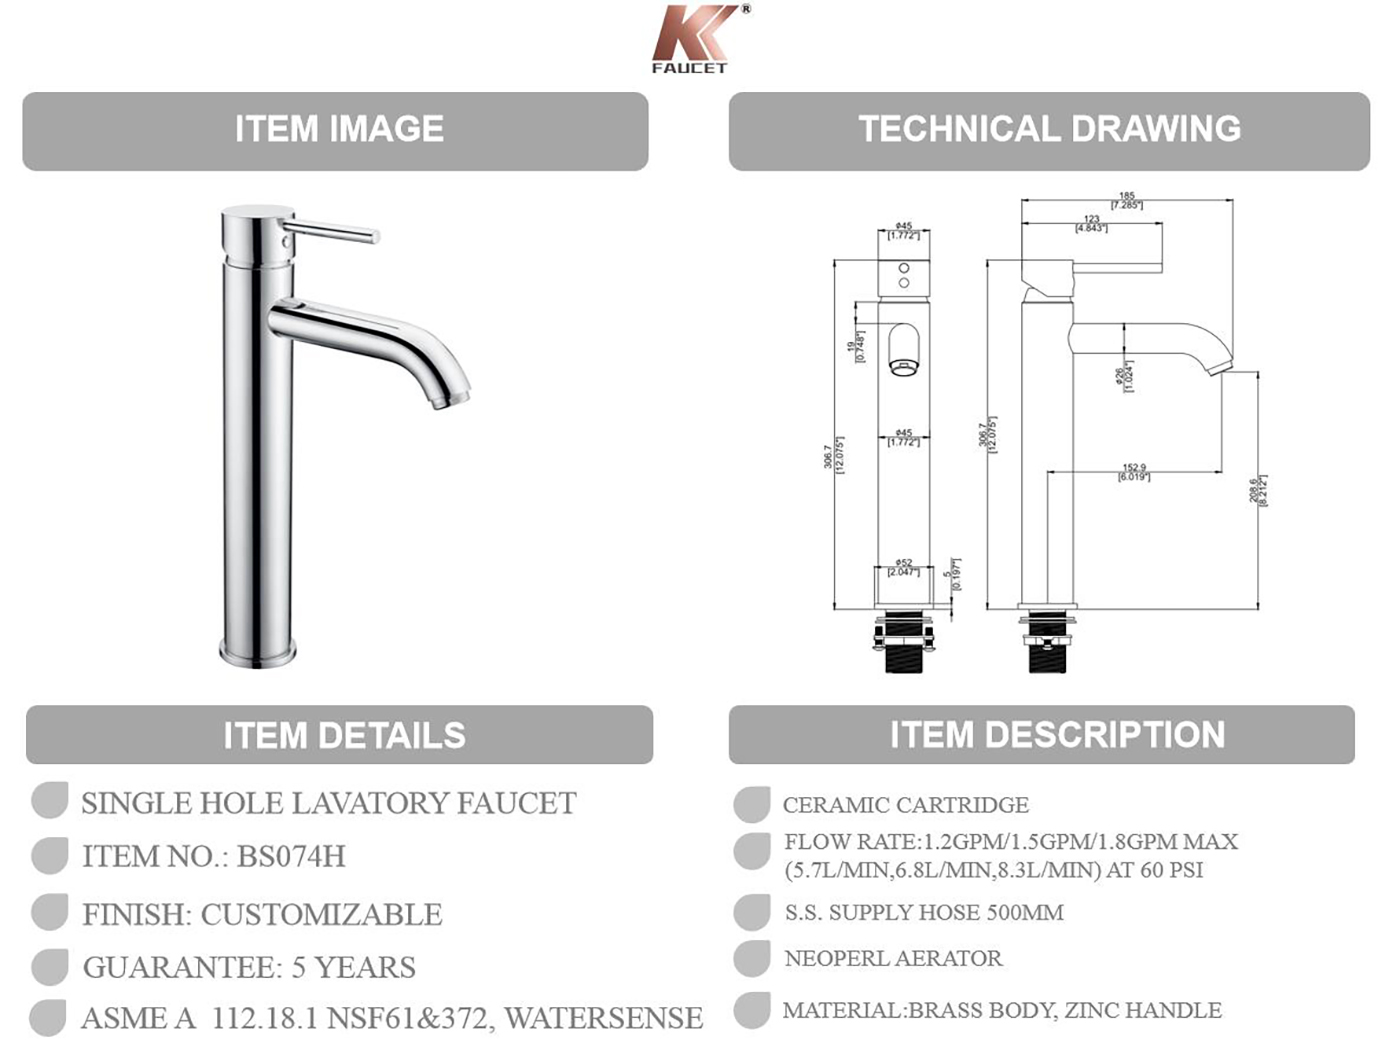 California Faucets new wall mount faucets | Supply House Times